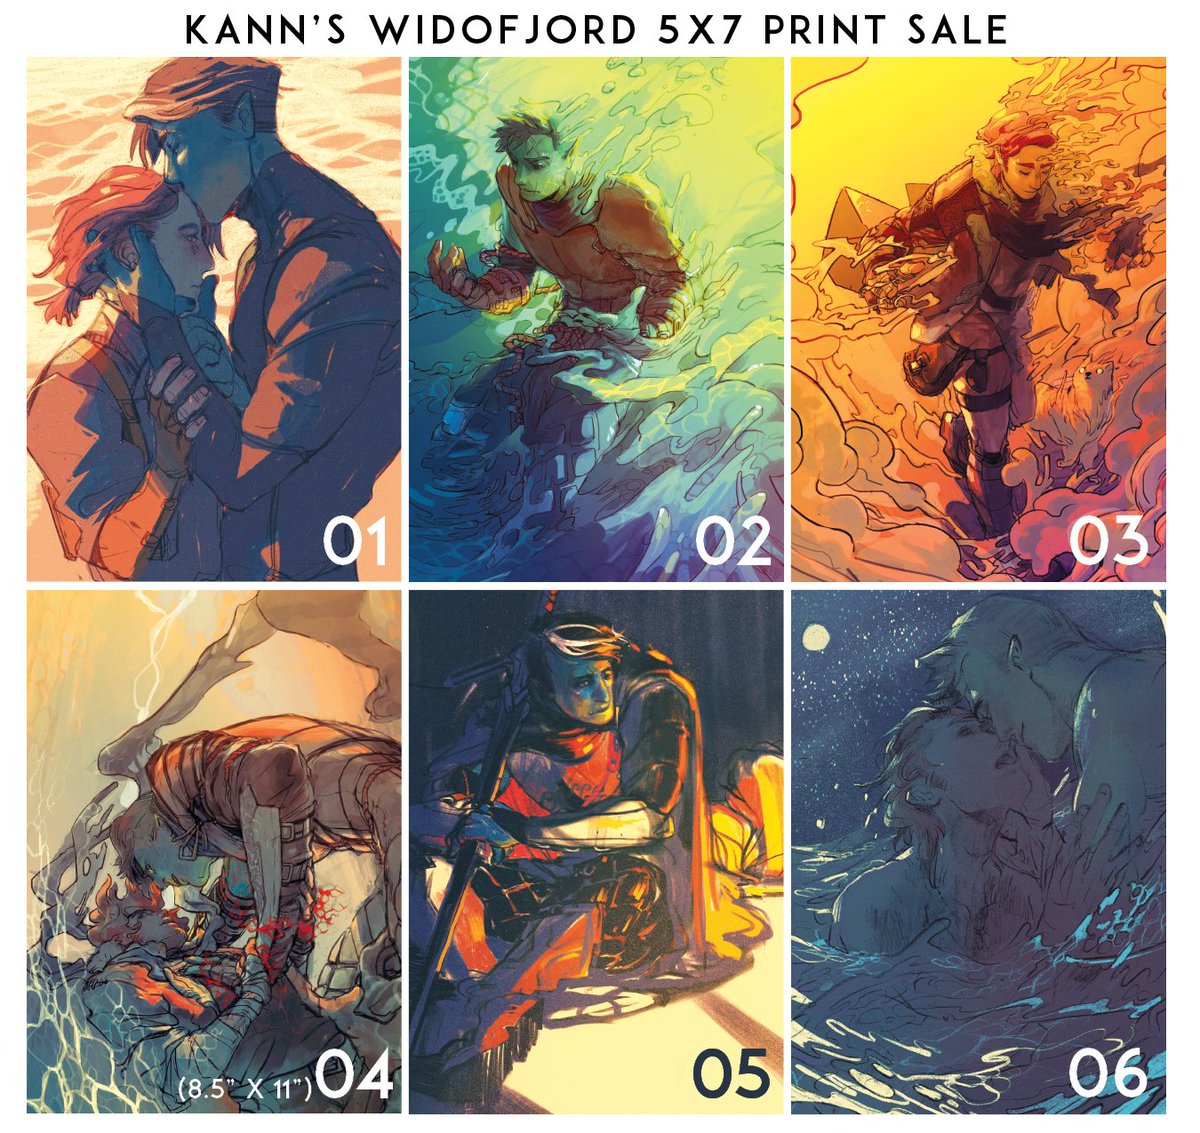 In light of recent interests, I'm opening up sales for prints! These are from an event cancellation, so quantity is limited, and will be on a first come first serve basis. Details on price, dimension, and paper are in the google form linked below:

https://t.co/AXMeh8pNFV 